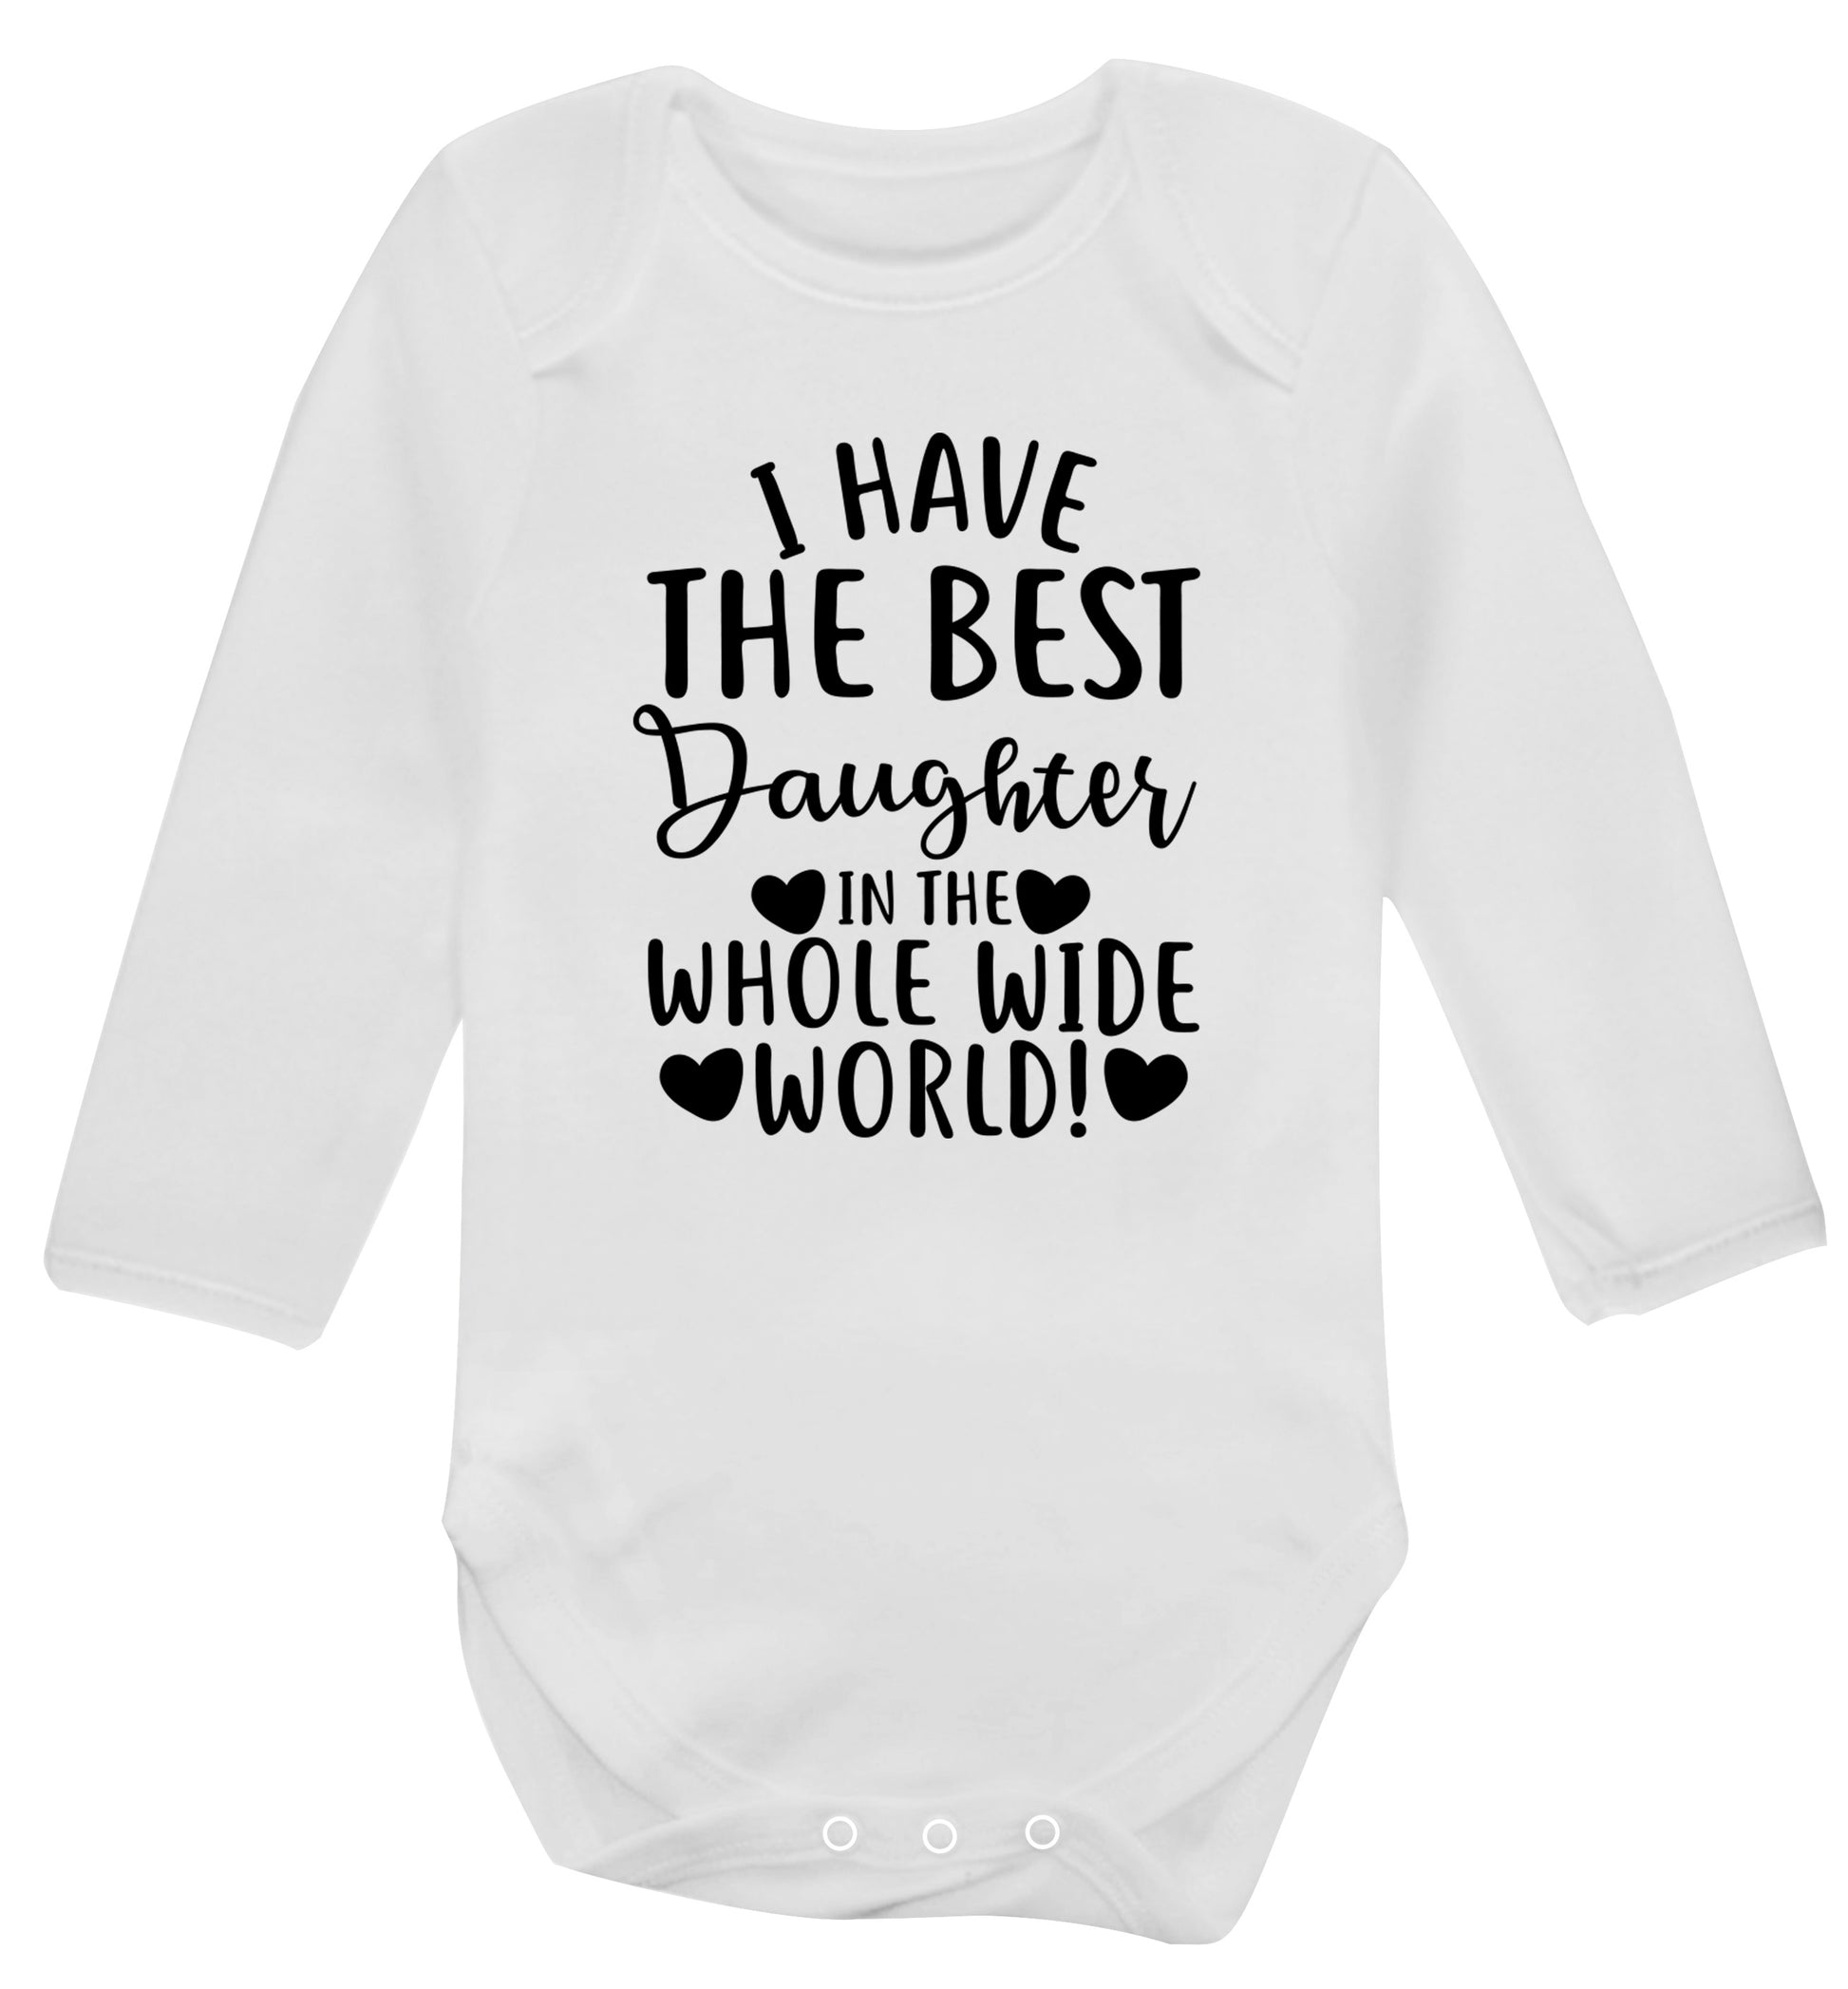 I have the best daughter in the whole wide world! Baby Vest long sleeved white 6-12 months